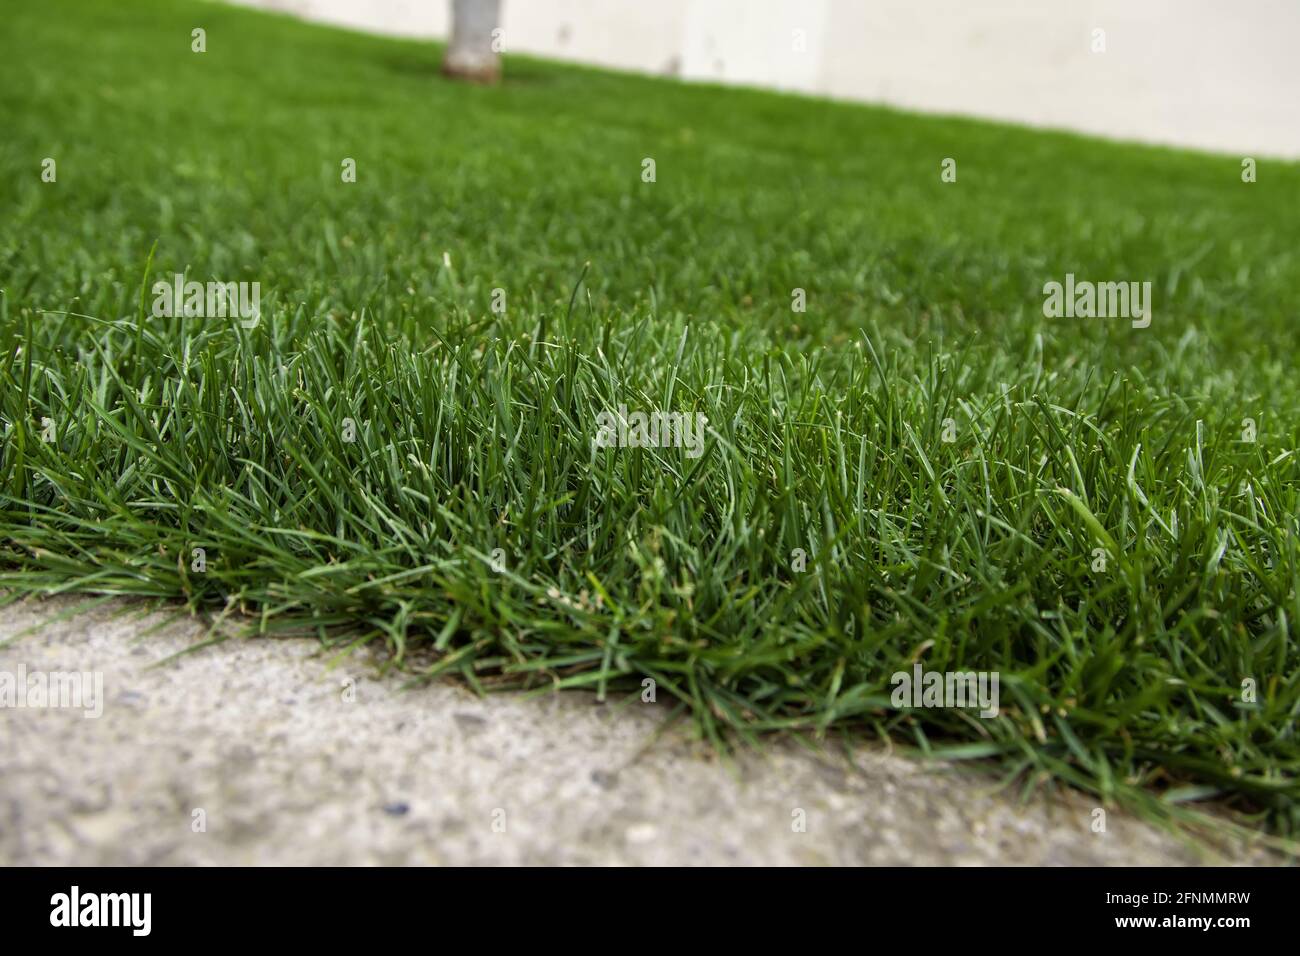 Natural grass in garden, details of nature, environment, landscape Stock Photo